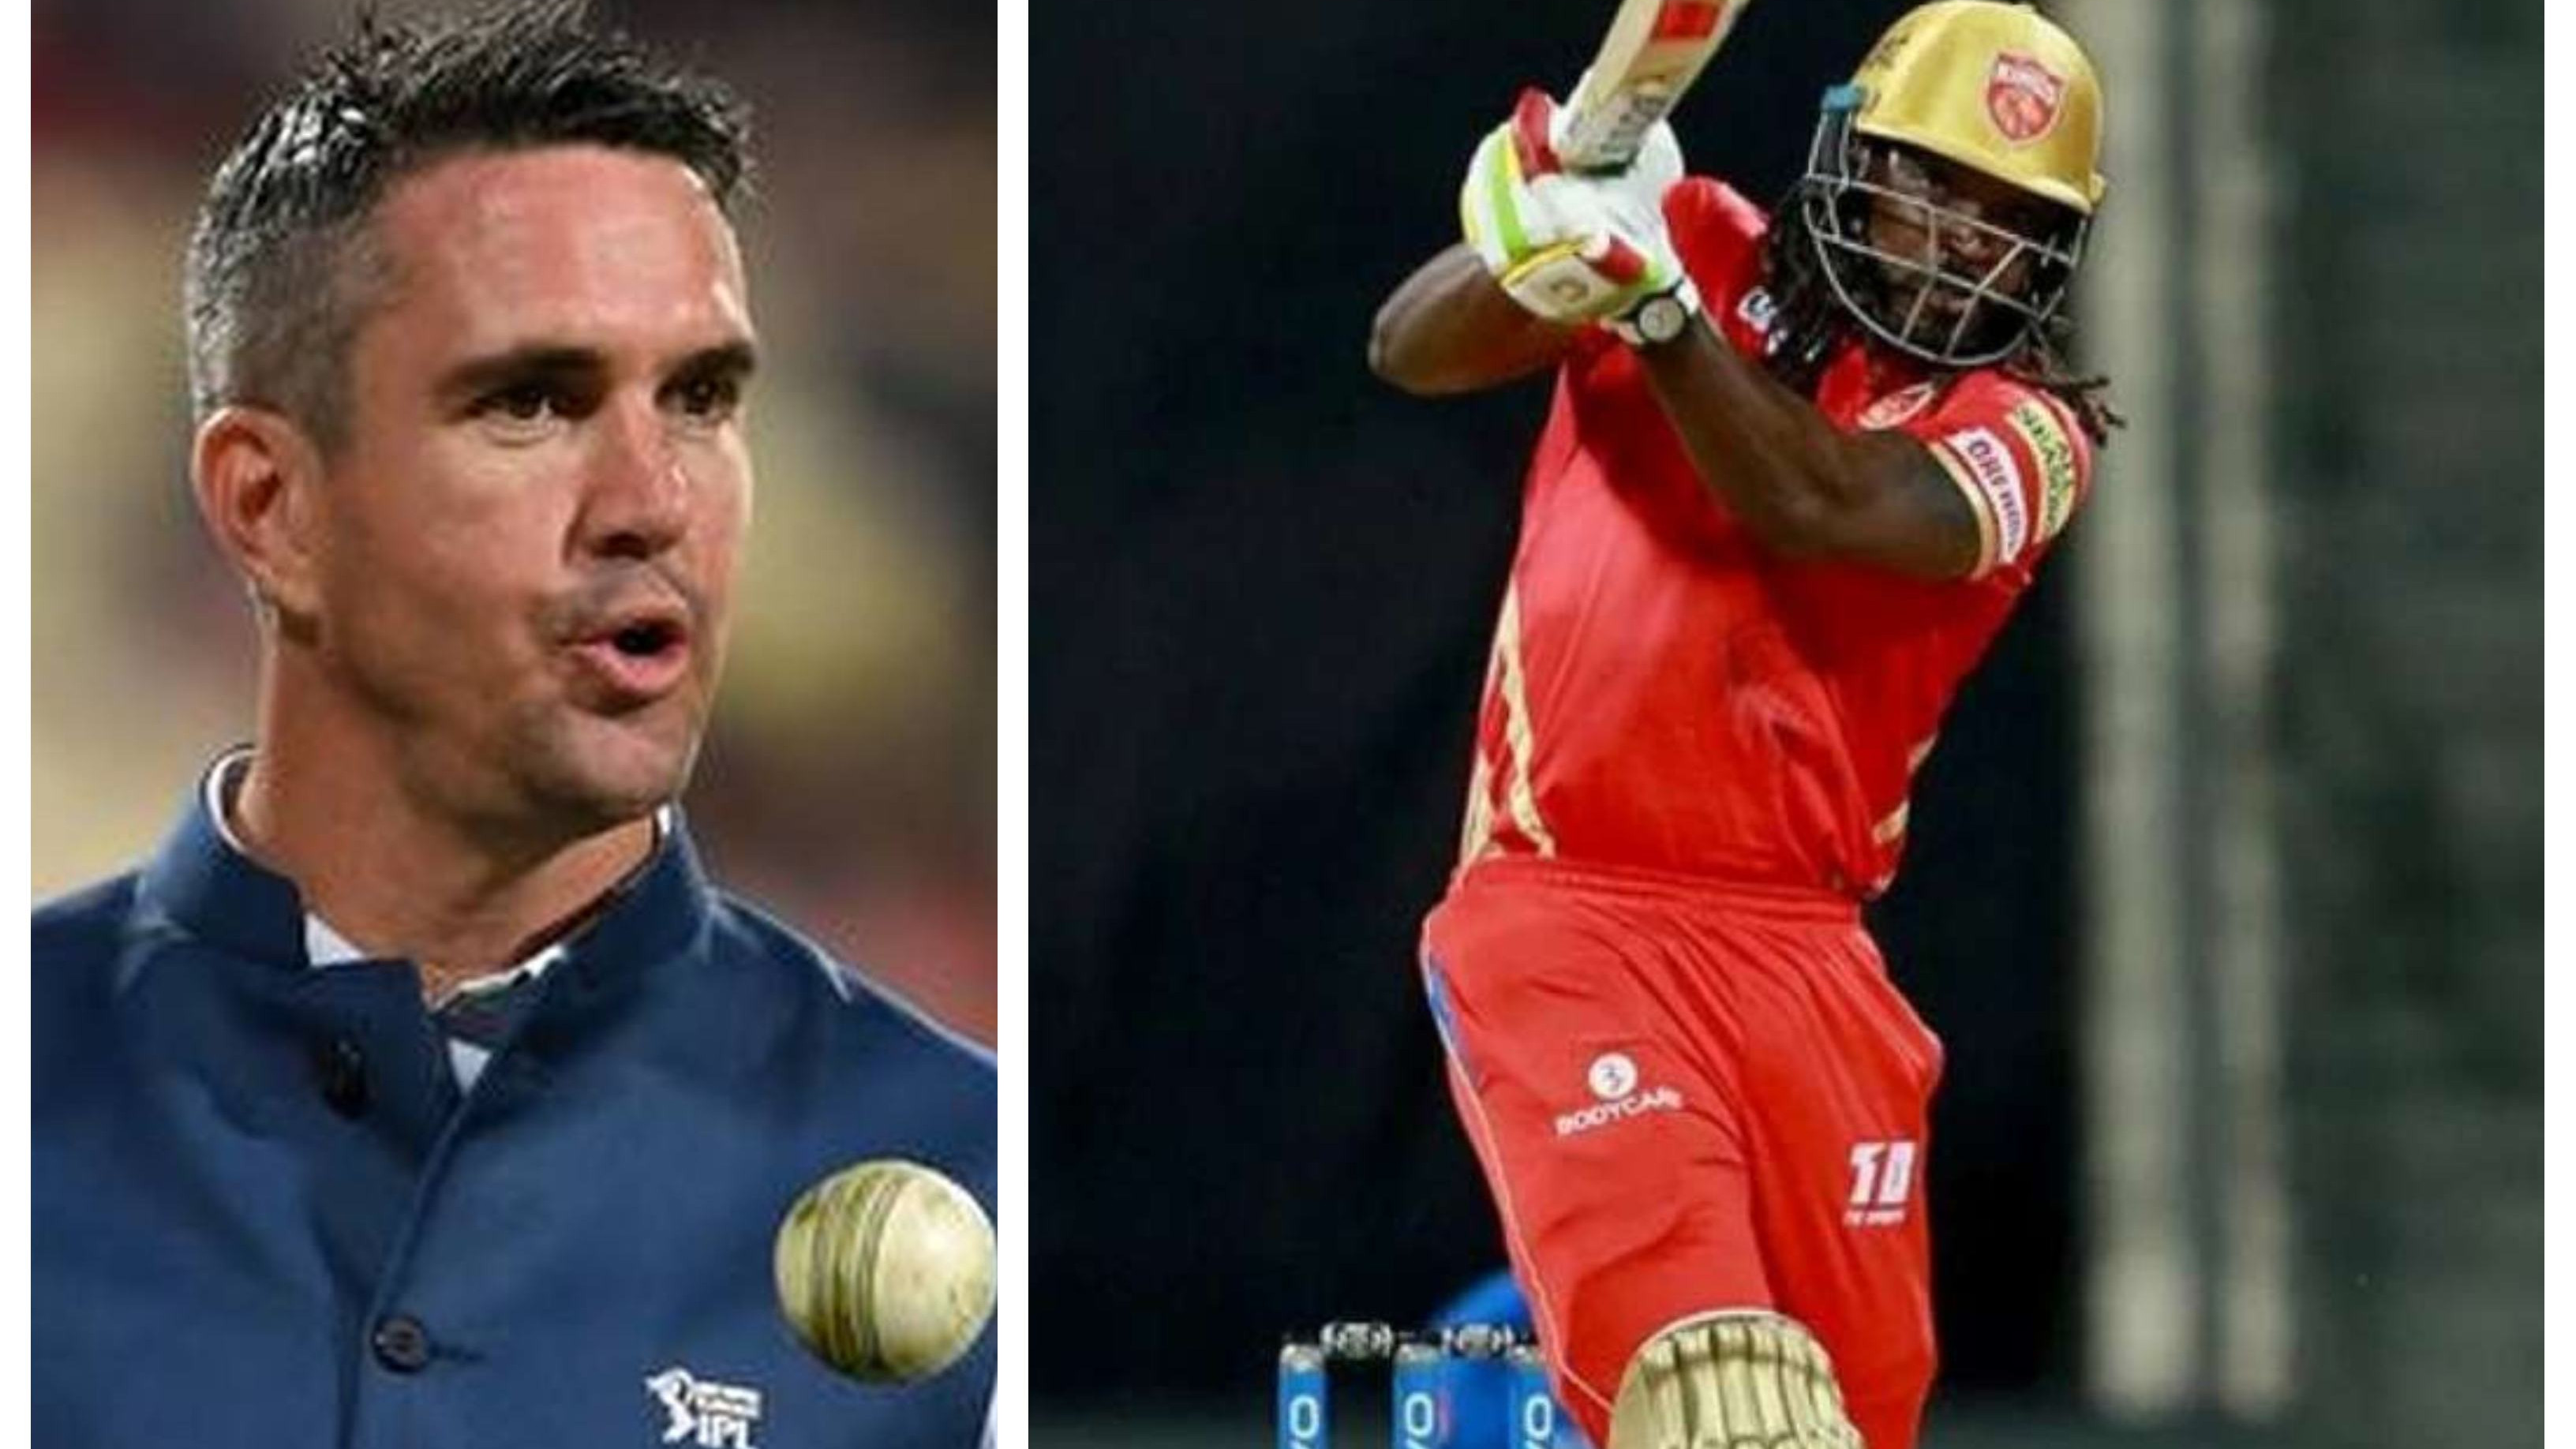 IPL 2021: ‘He feels like they are using him’, Pietersen claims Gayle pulled out of IPL due to PBKS’ harsh treatment